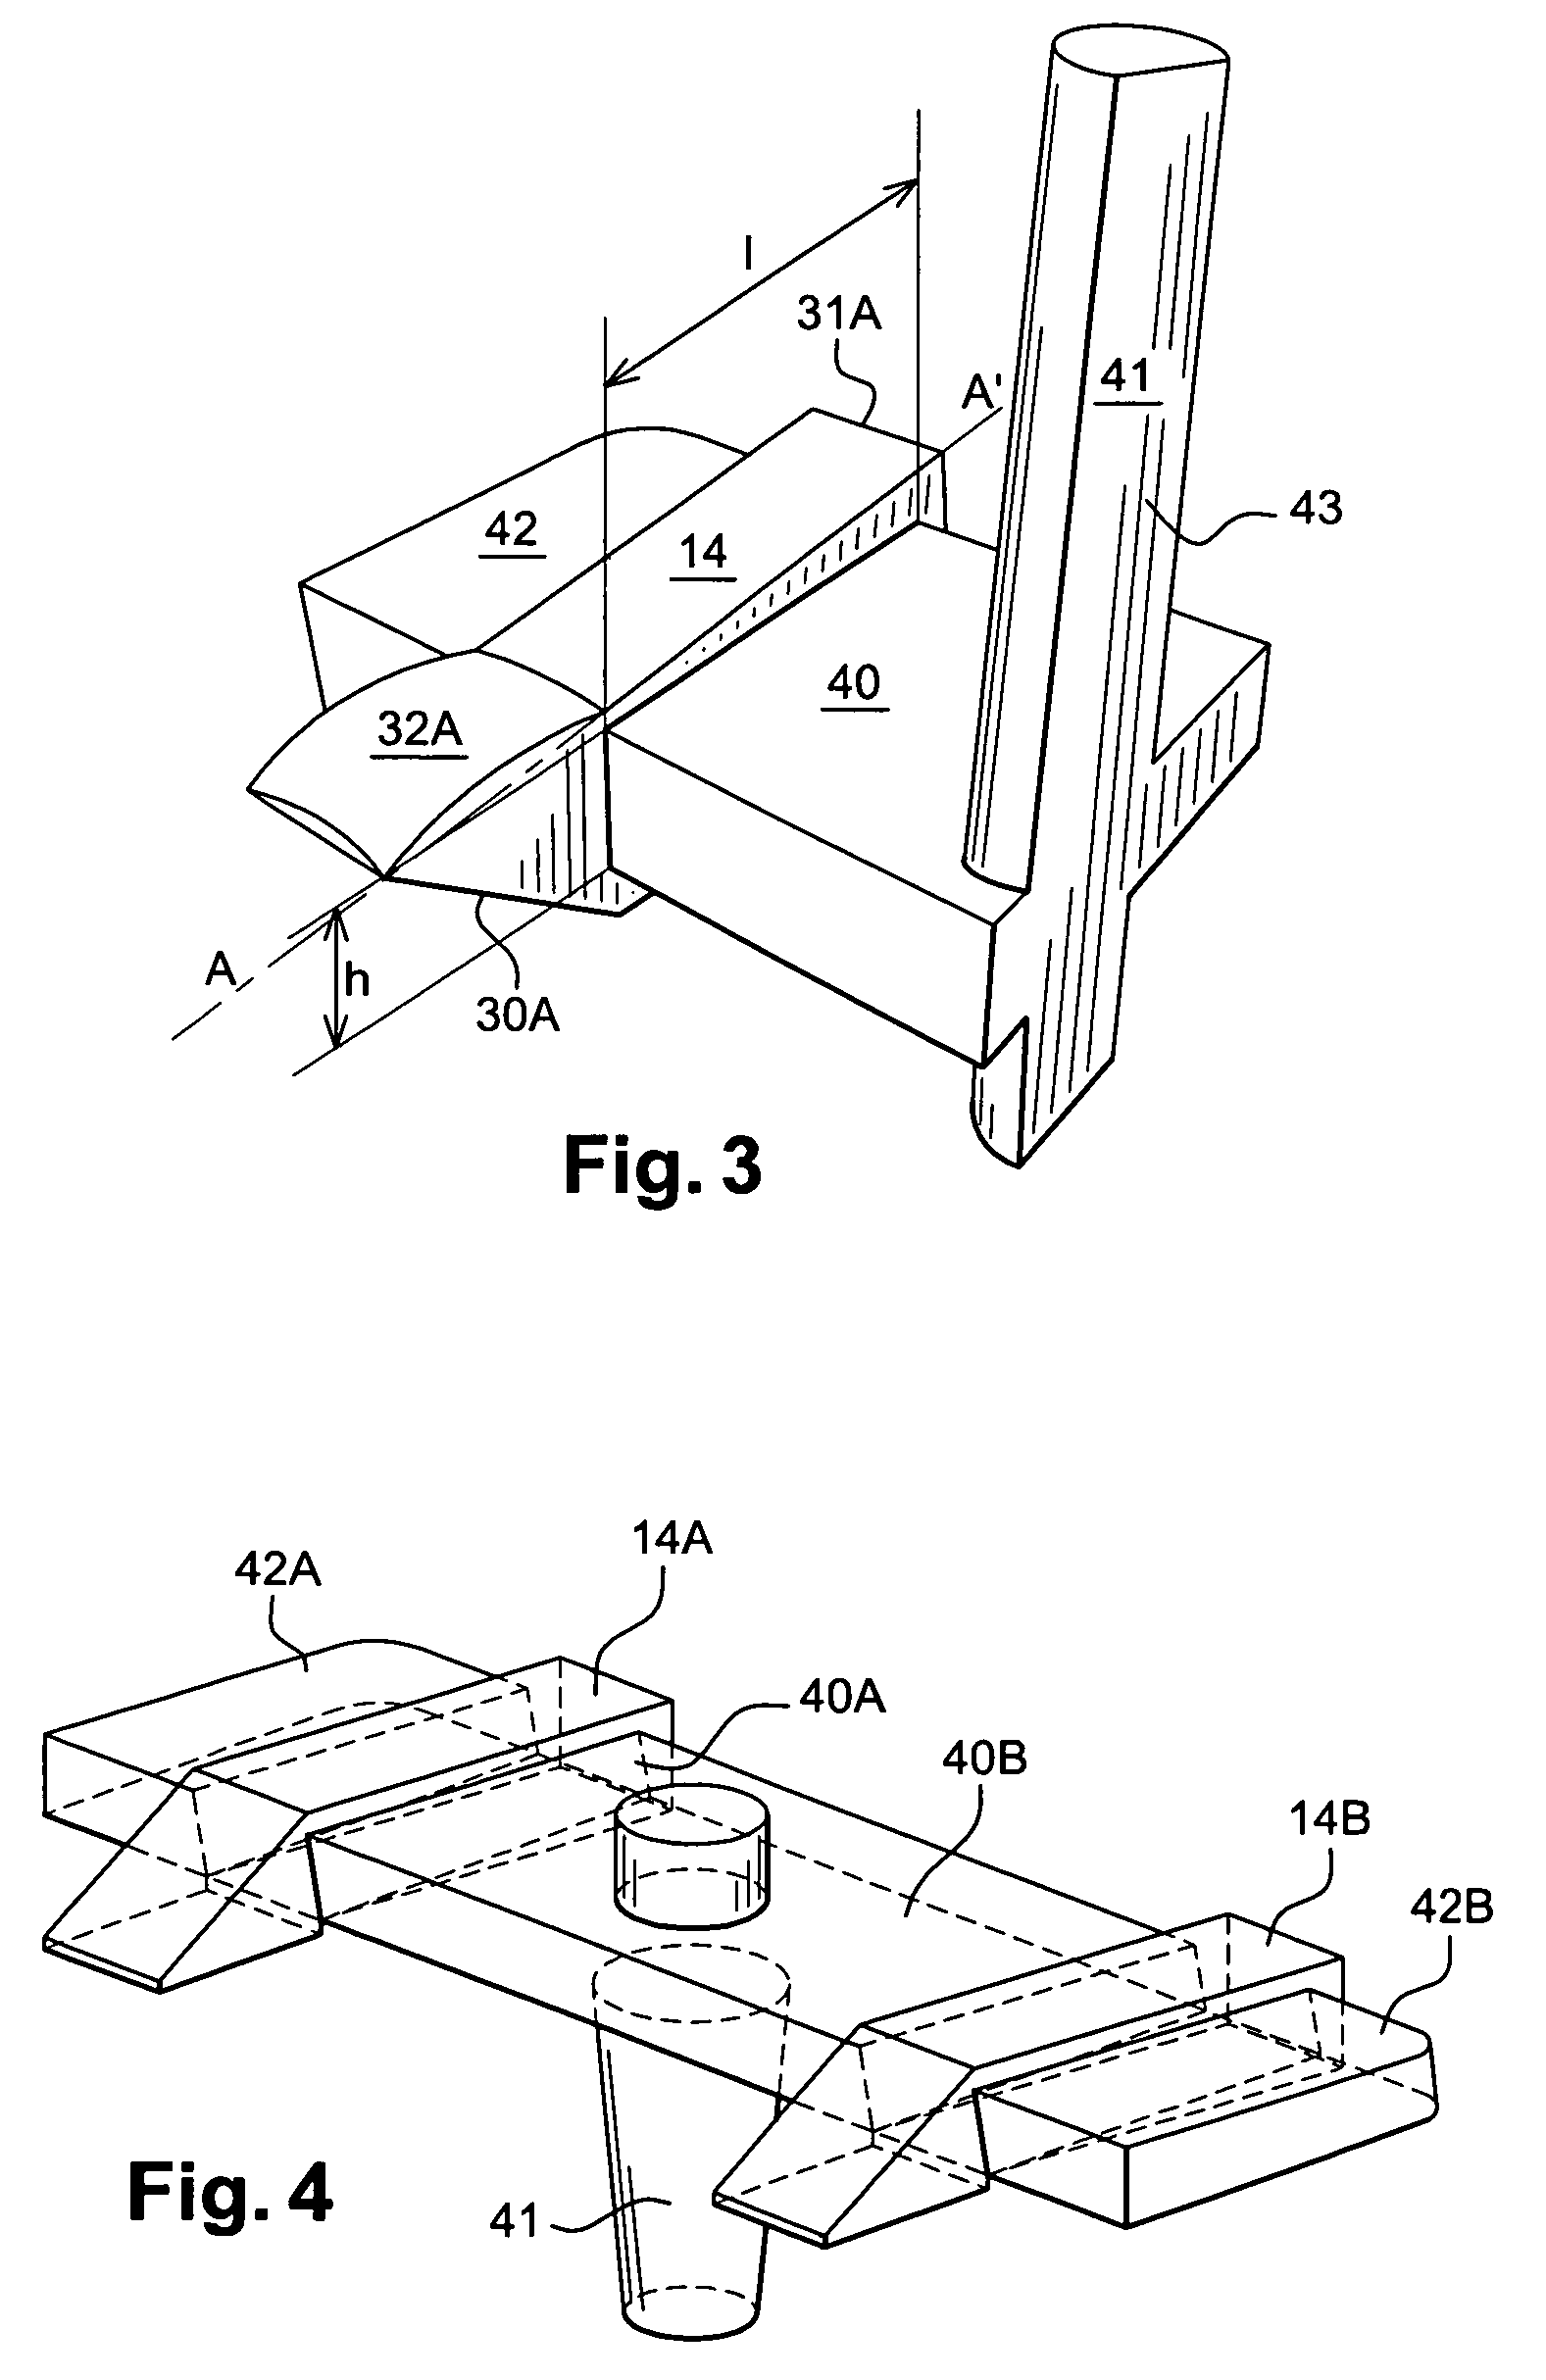 Method of fabricating a light duct of thermoplastic material